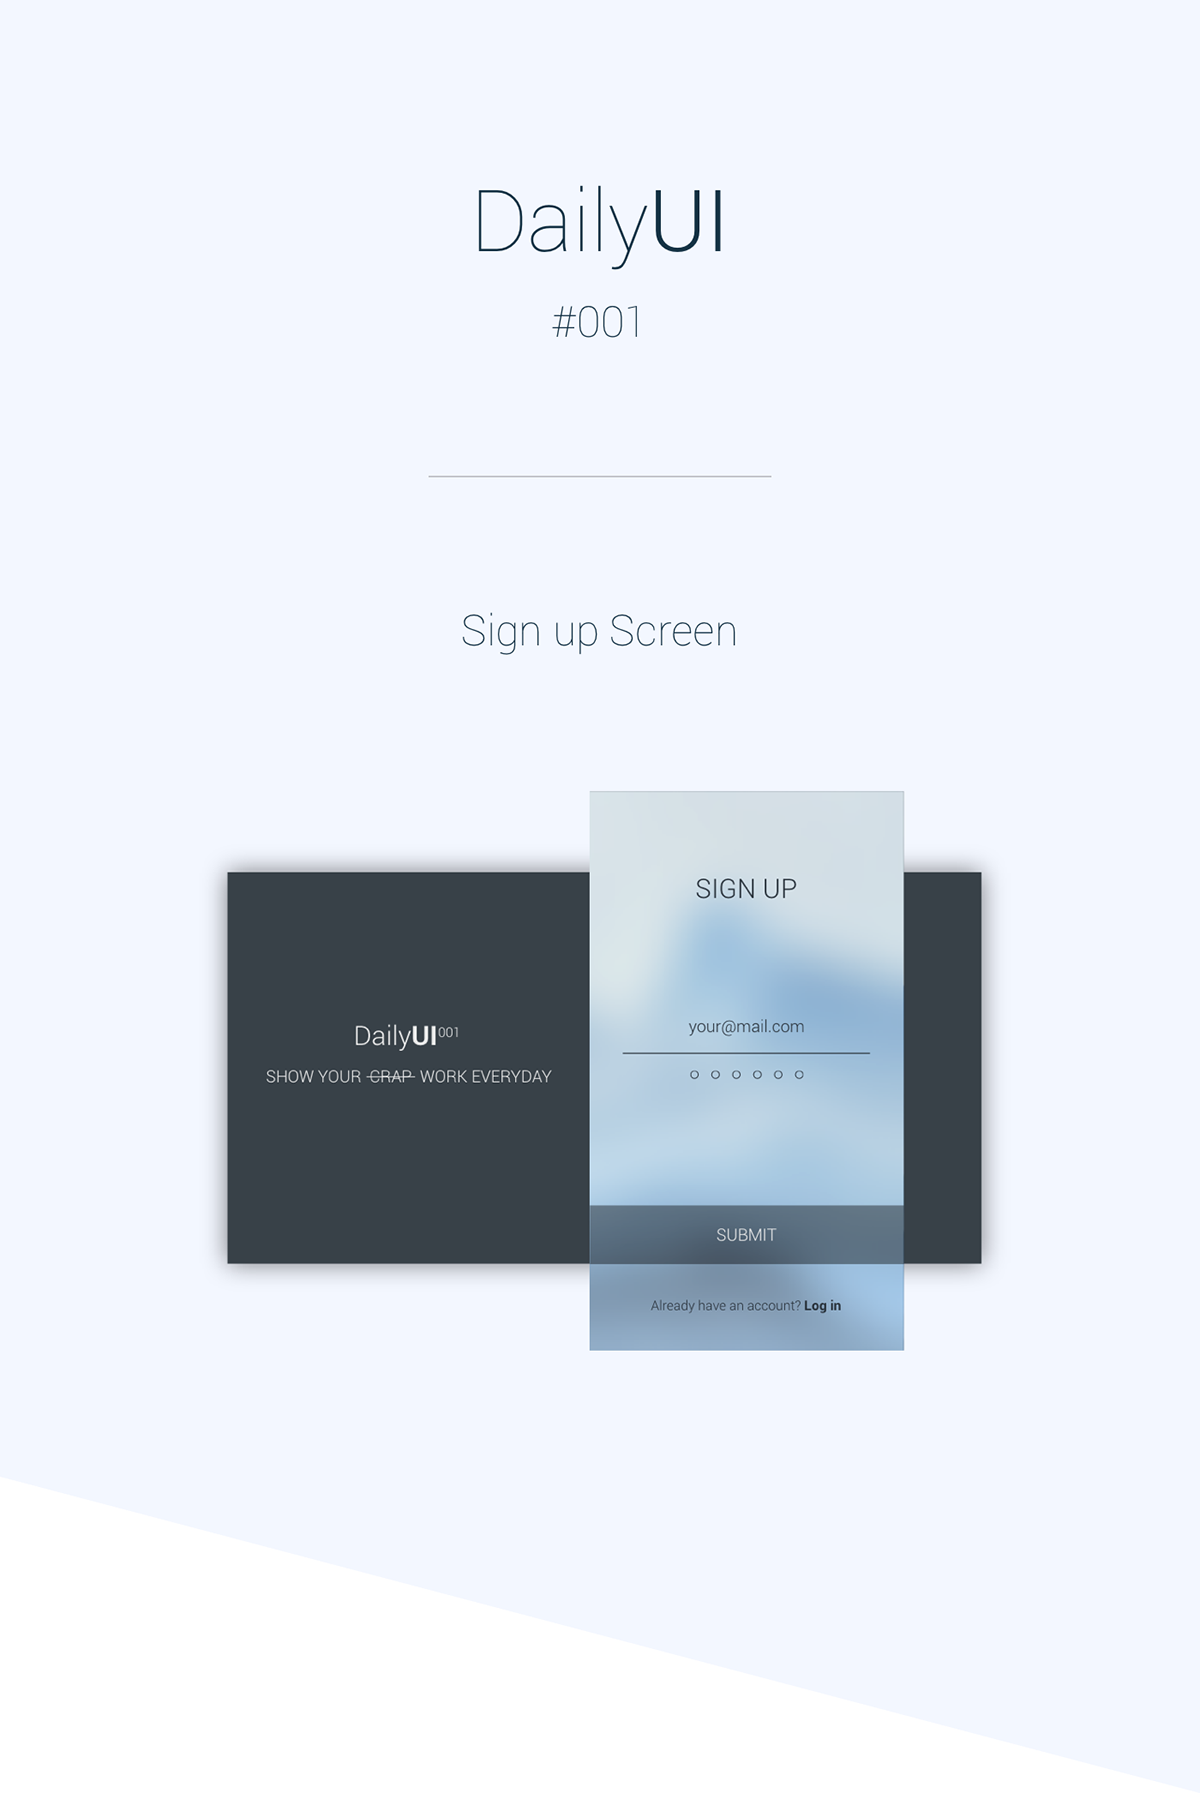 sign up Form iphone daily ui UI ux mobile home screen